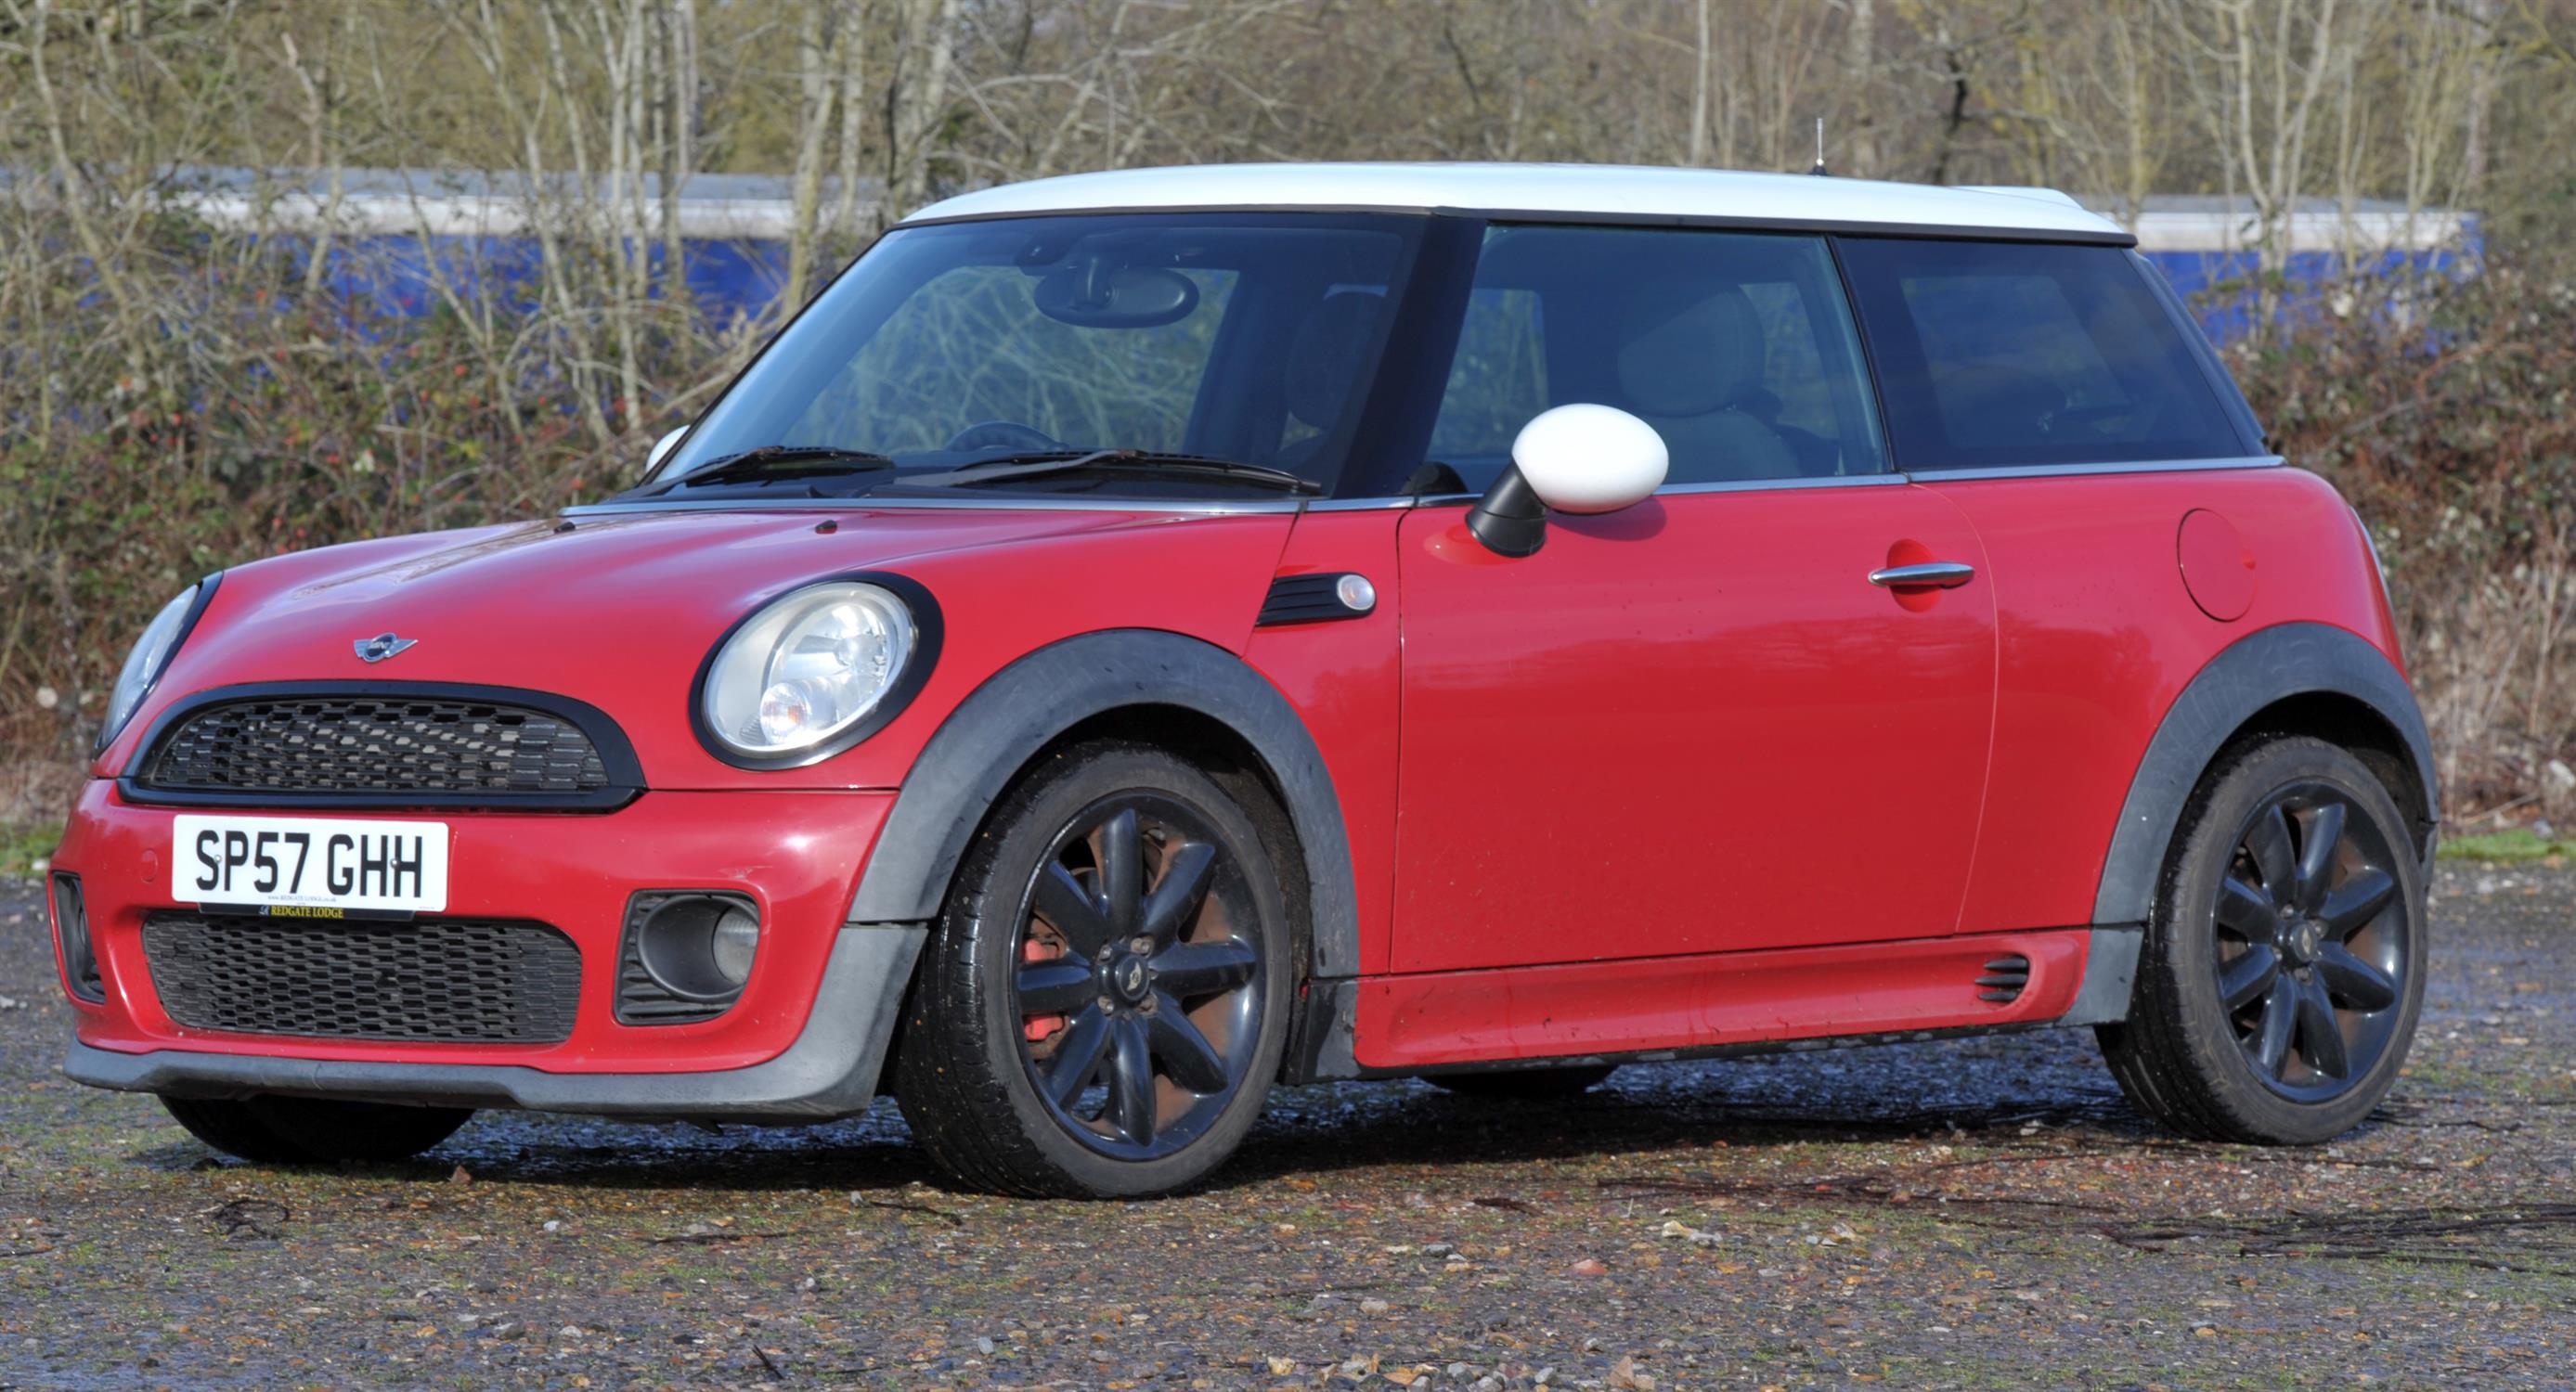 2007 Mini 1.6 Cooper Petrol with John Cooper Works Areo Body Kit. Registration number: SP57 GHH. - Image 4 of 14